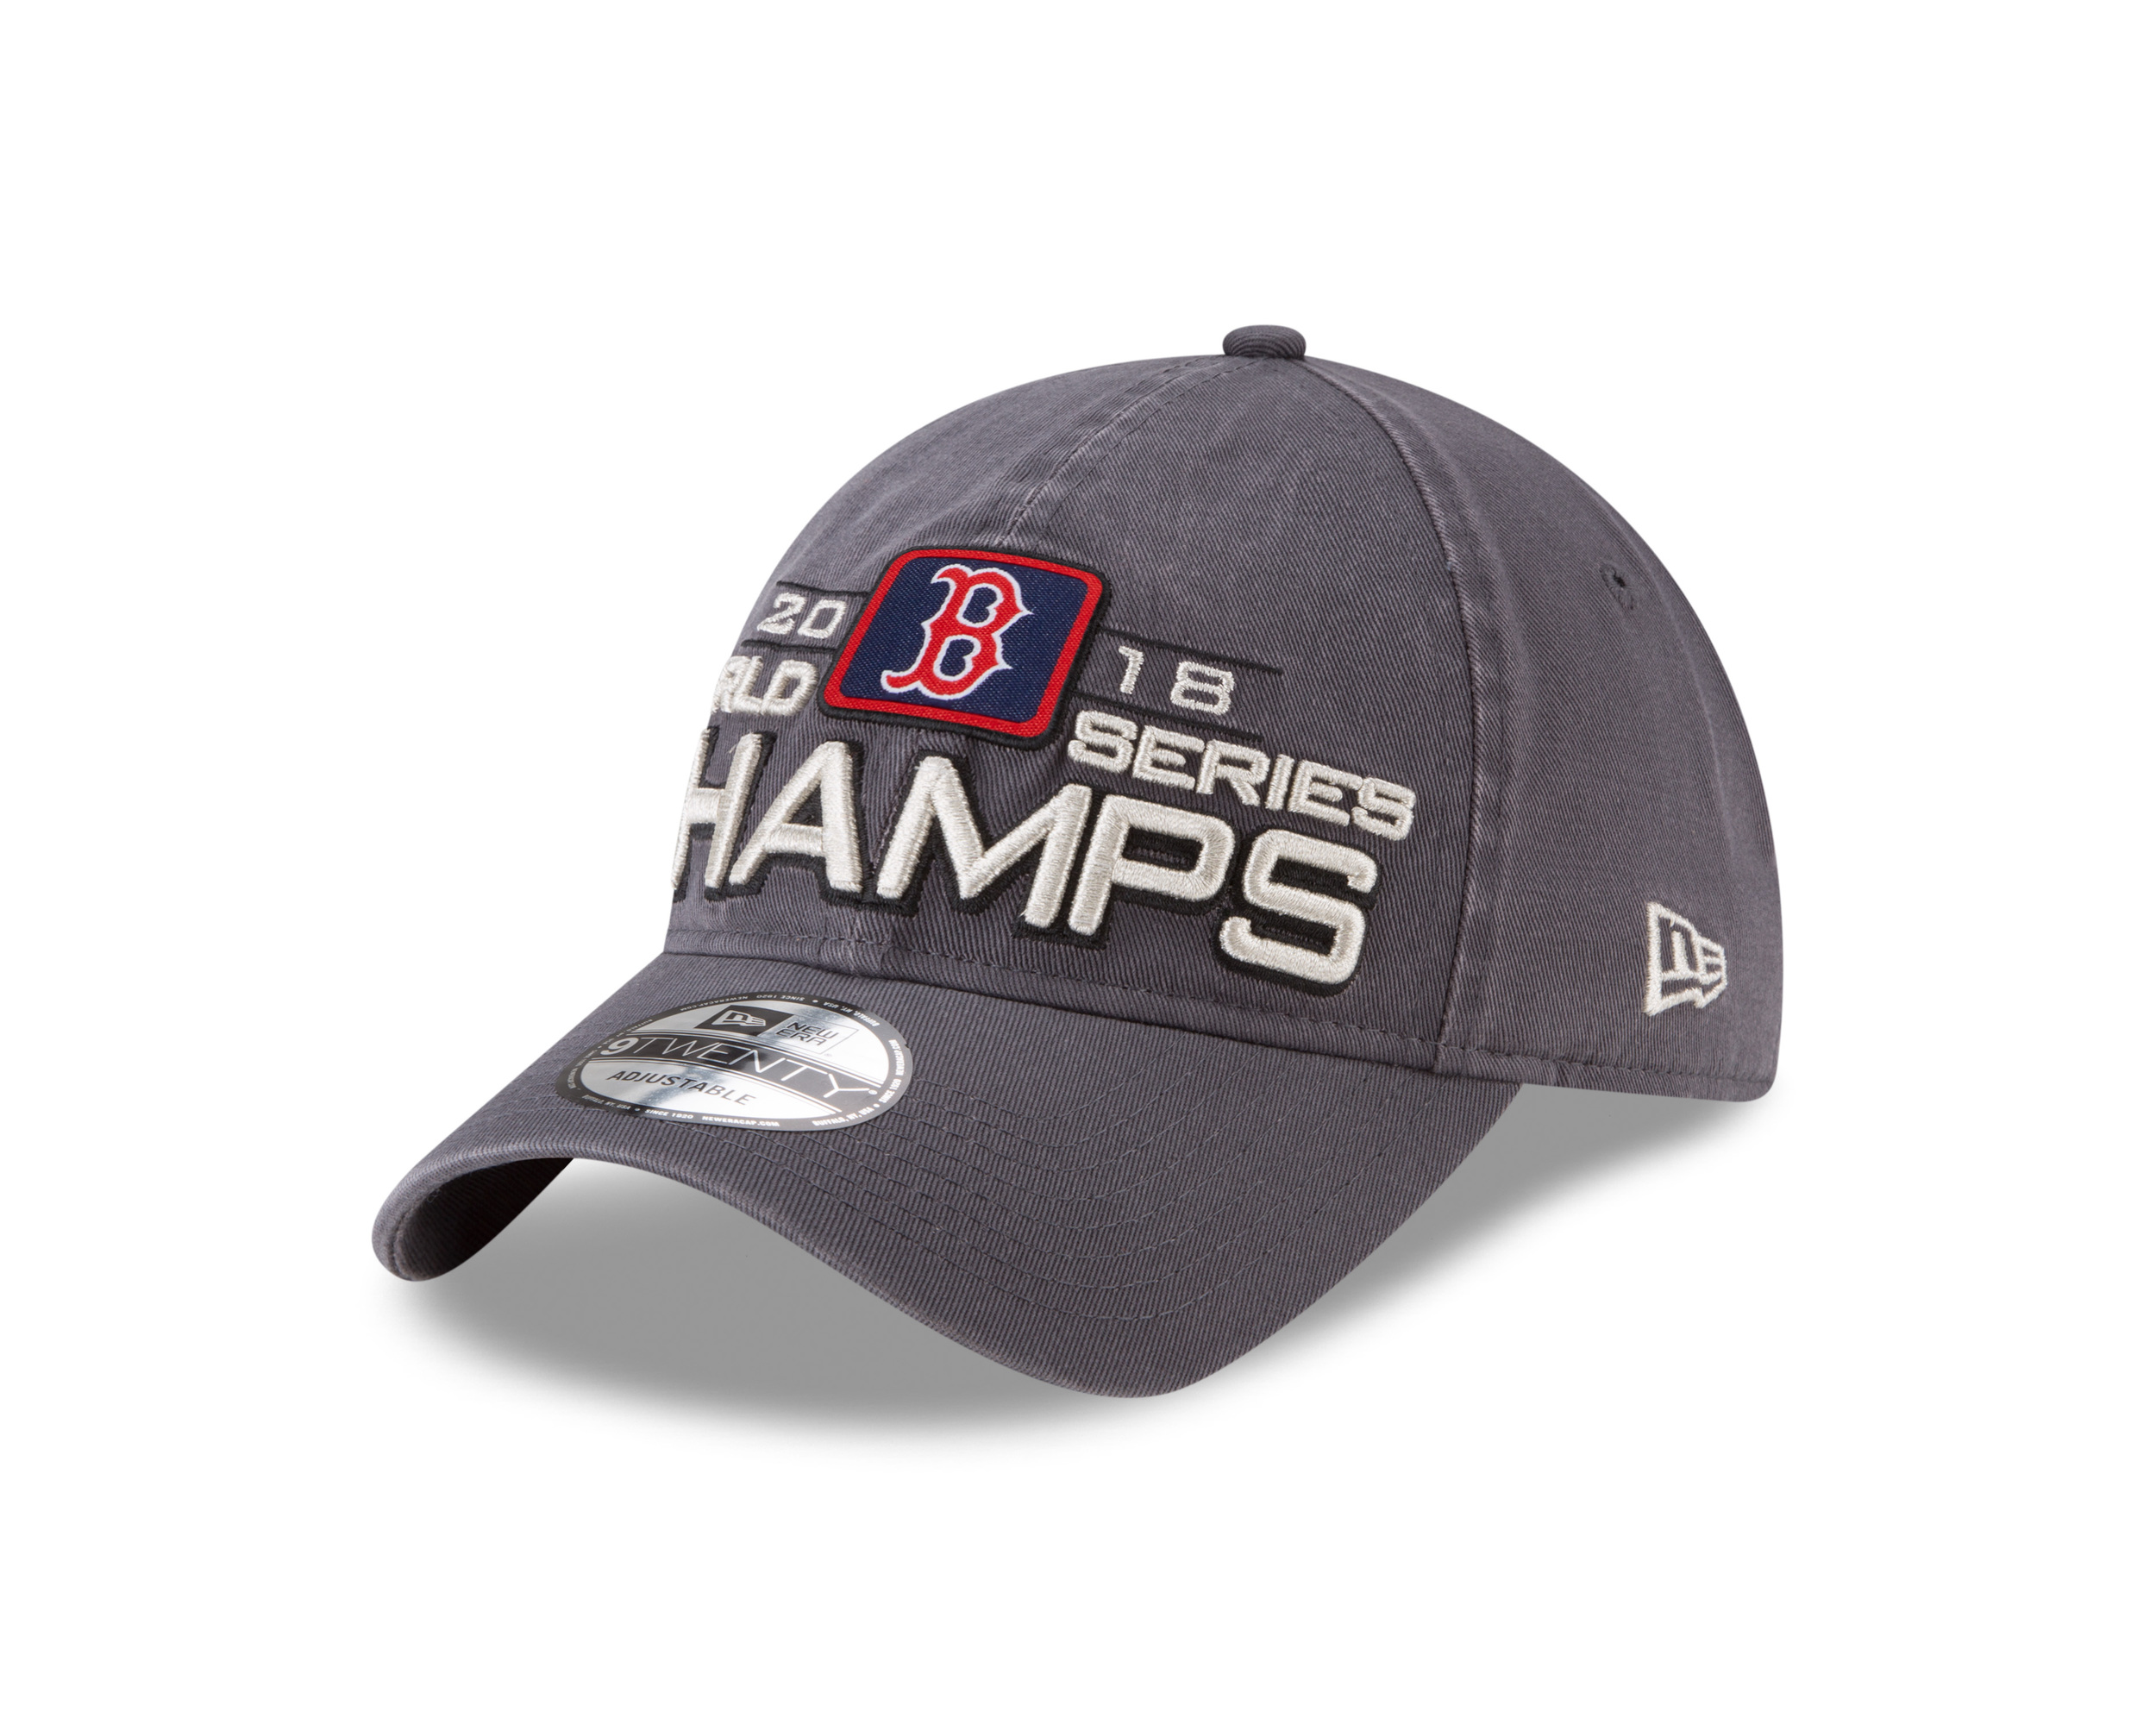 New Era Cap Drops Red Sox World Series Champion Collection with 